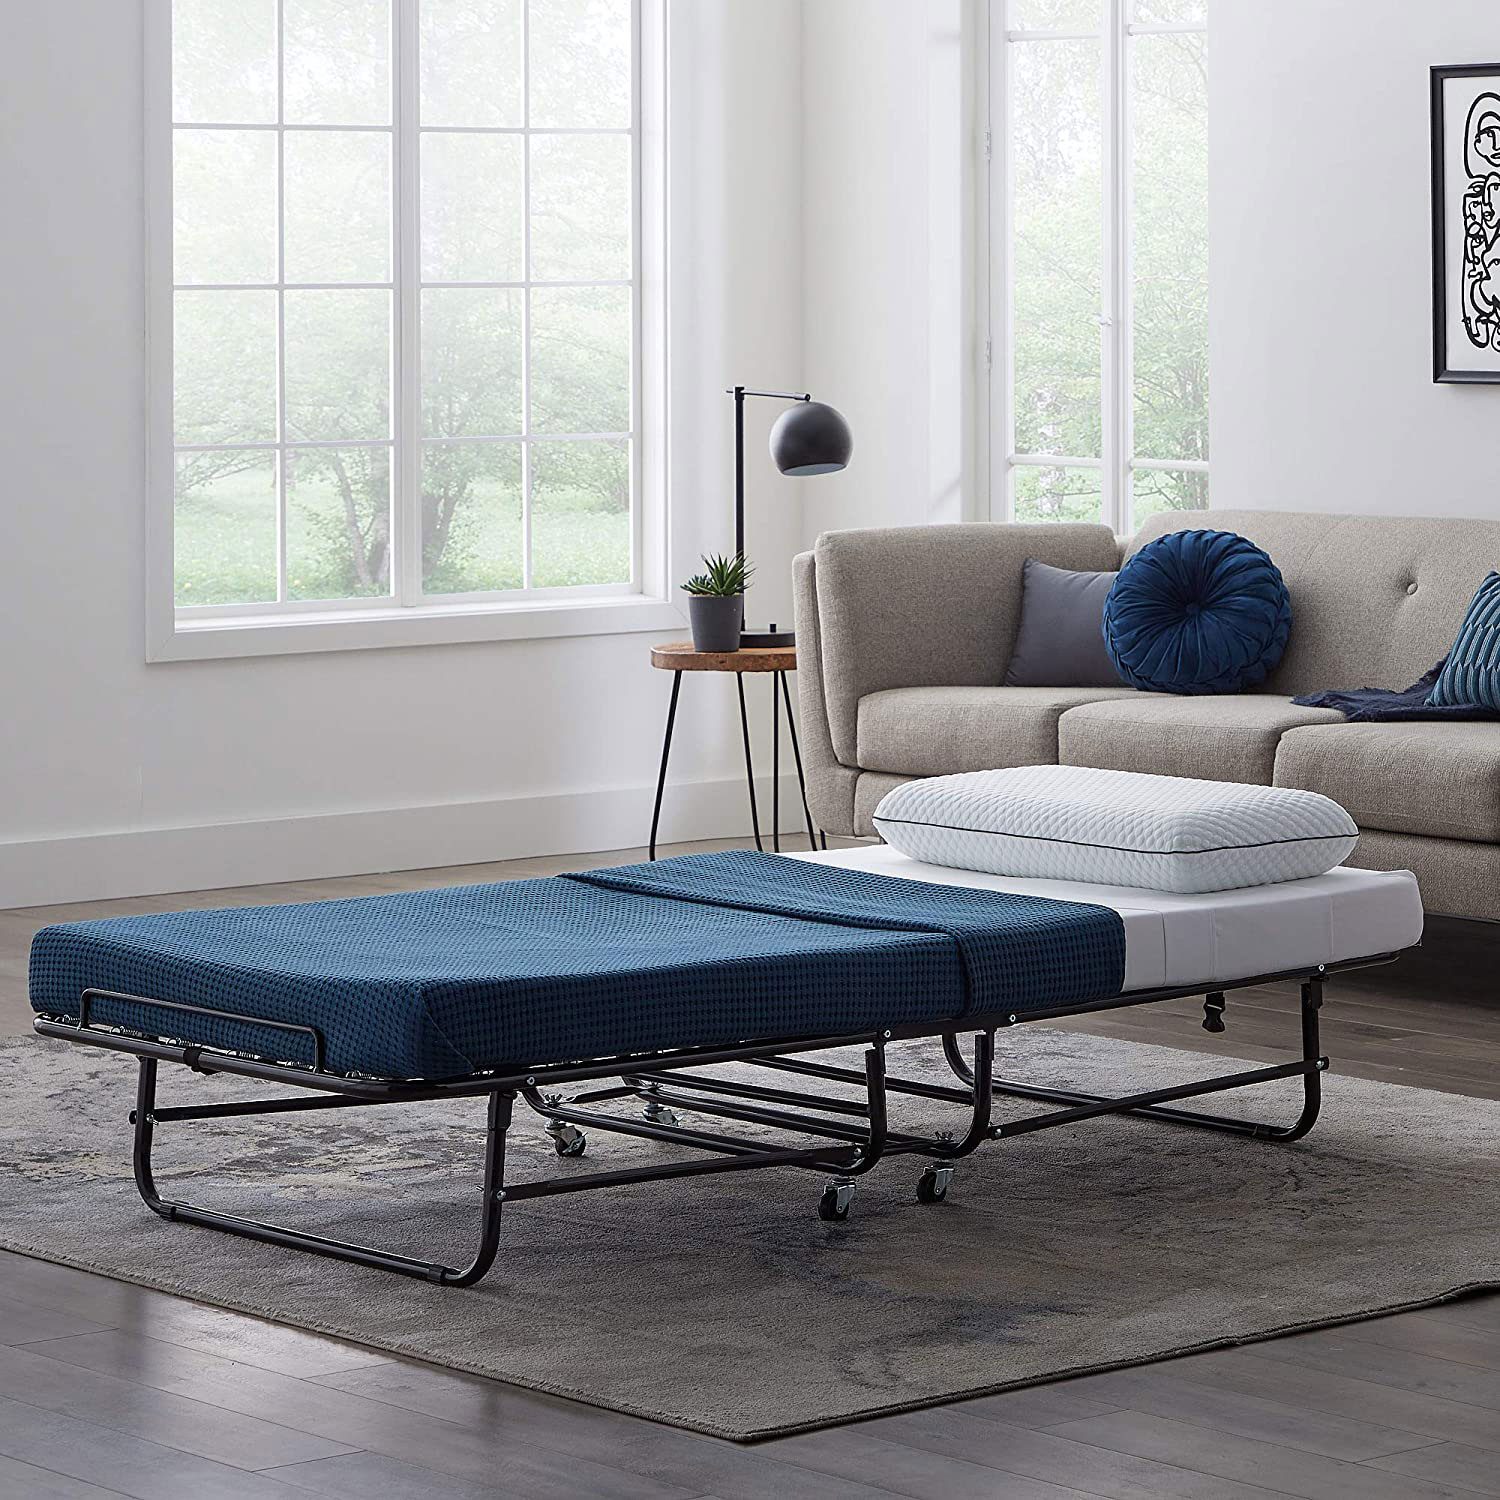 The Best Folding Beds For Hosting, Stow Away Bed Frame